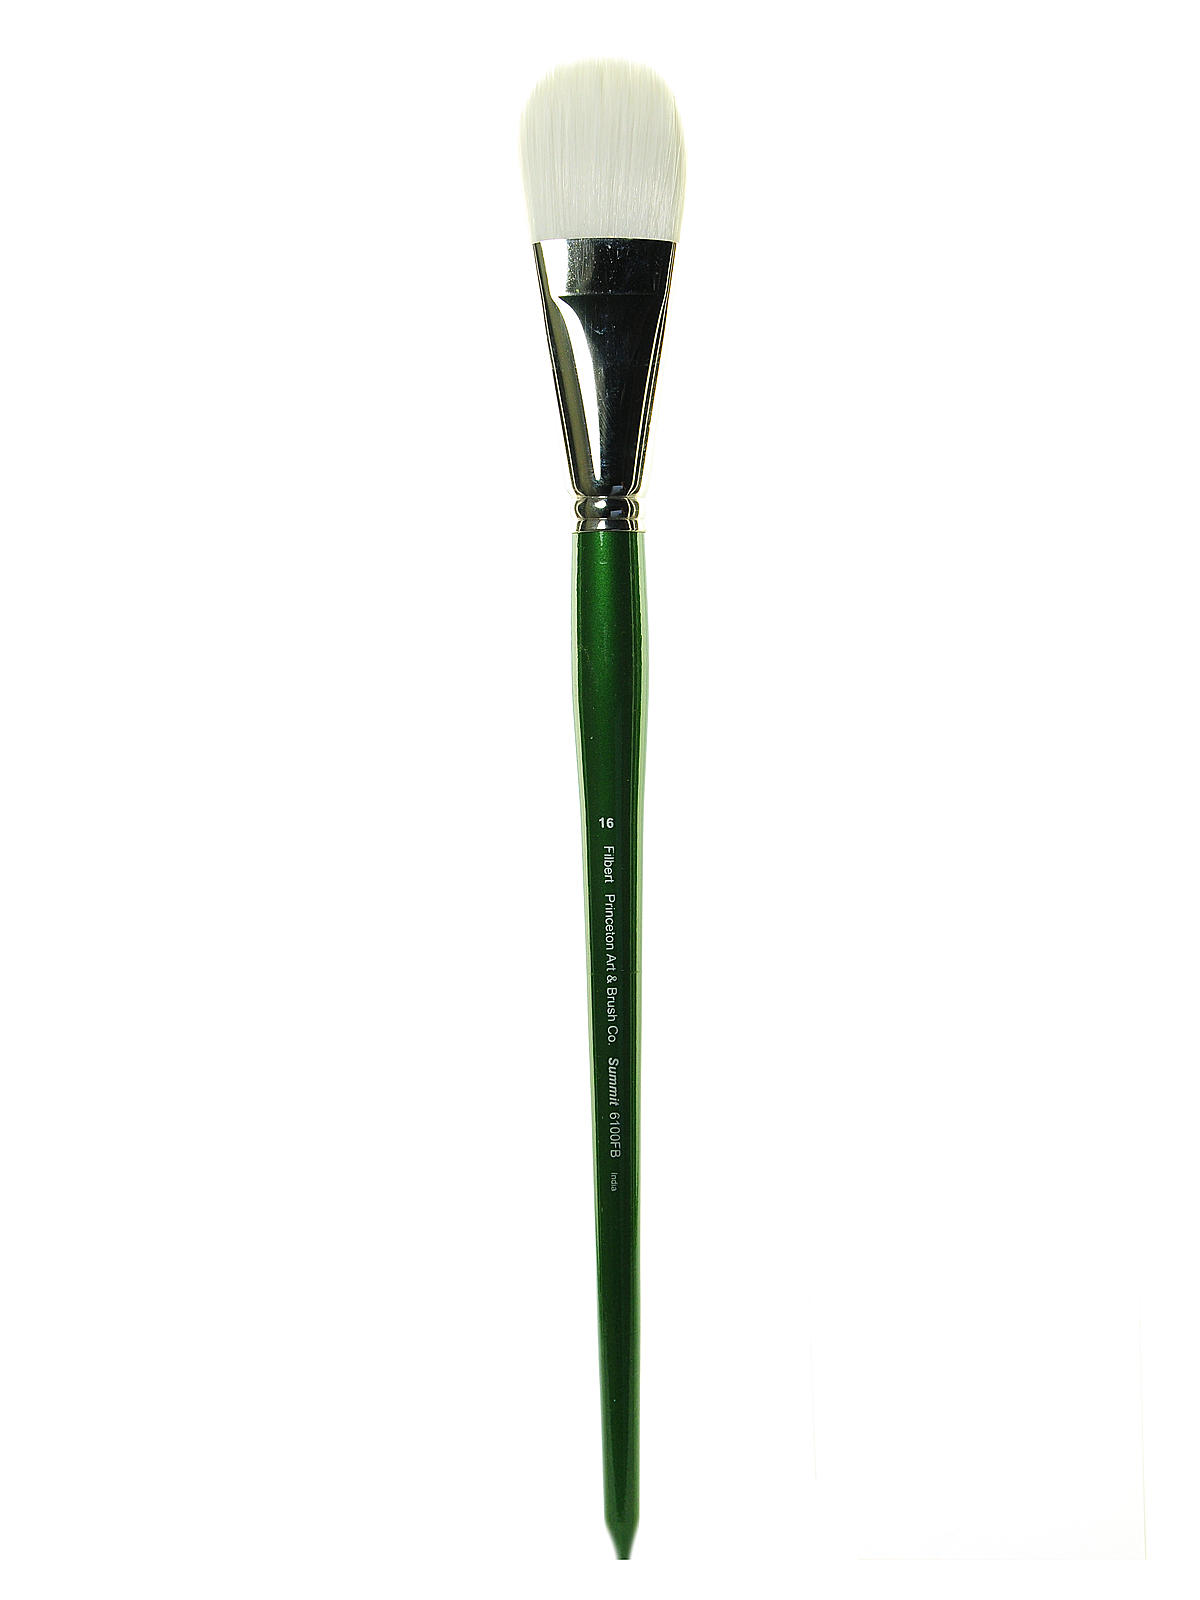 6100 Summit White Synthetic Long Handle Brushes 16 Filbert